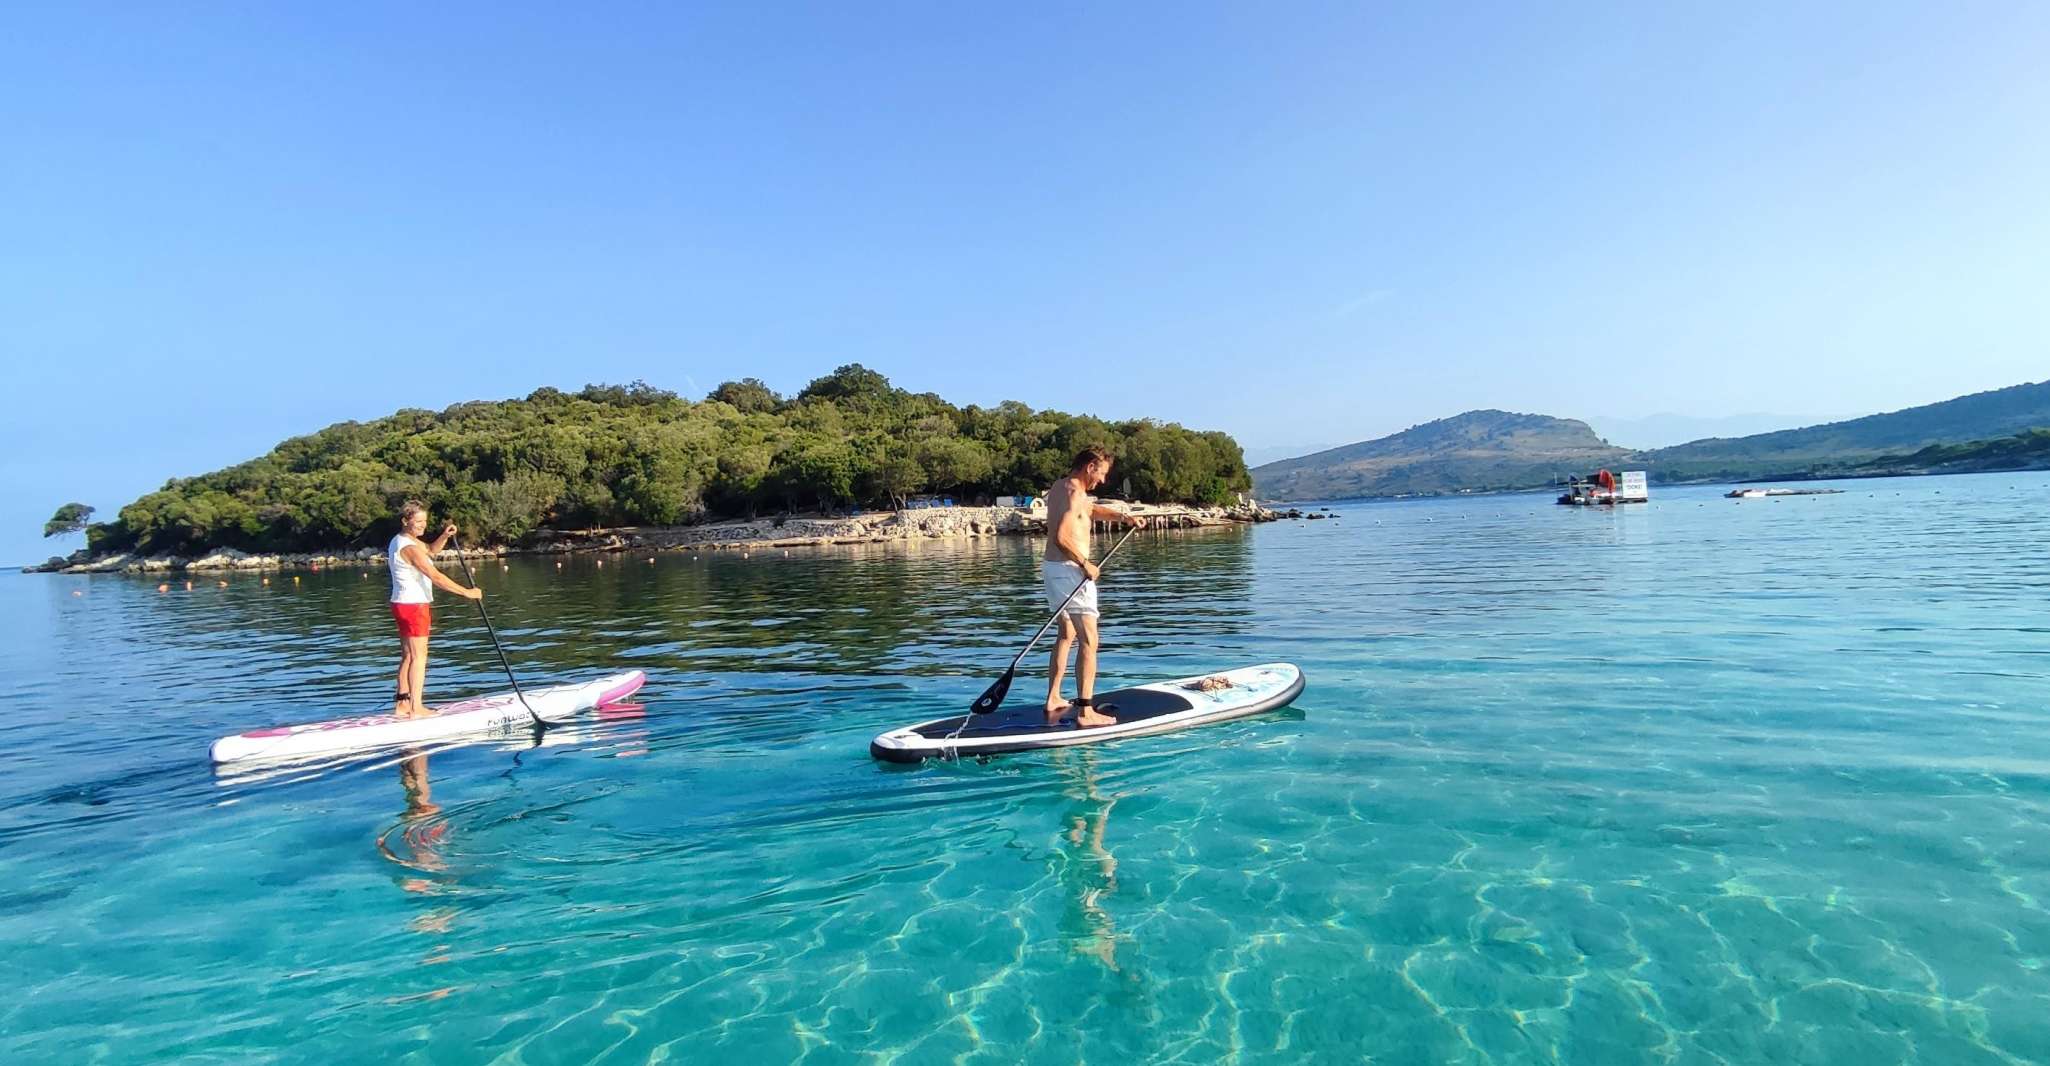 iStand-Up Paddleboarding Tour around Ksamil islands - Housity